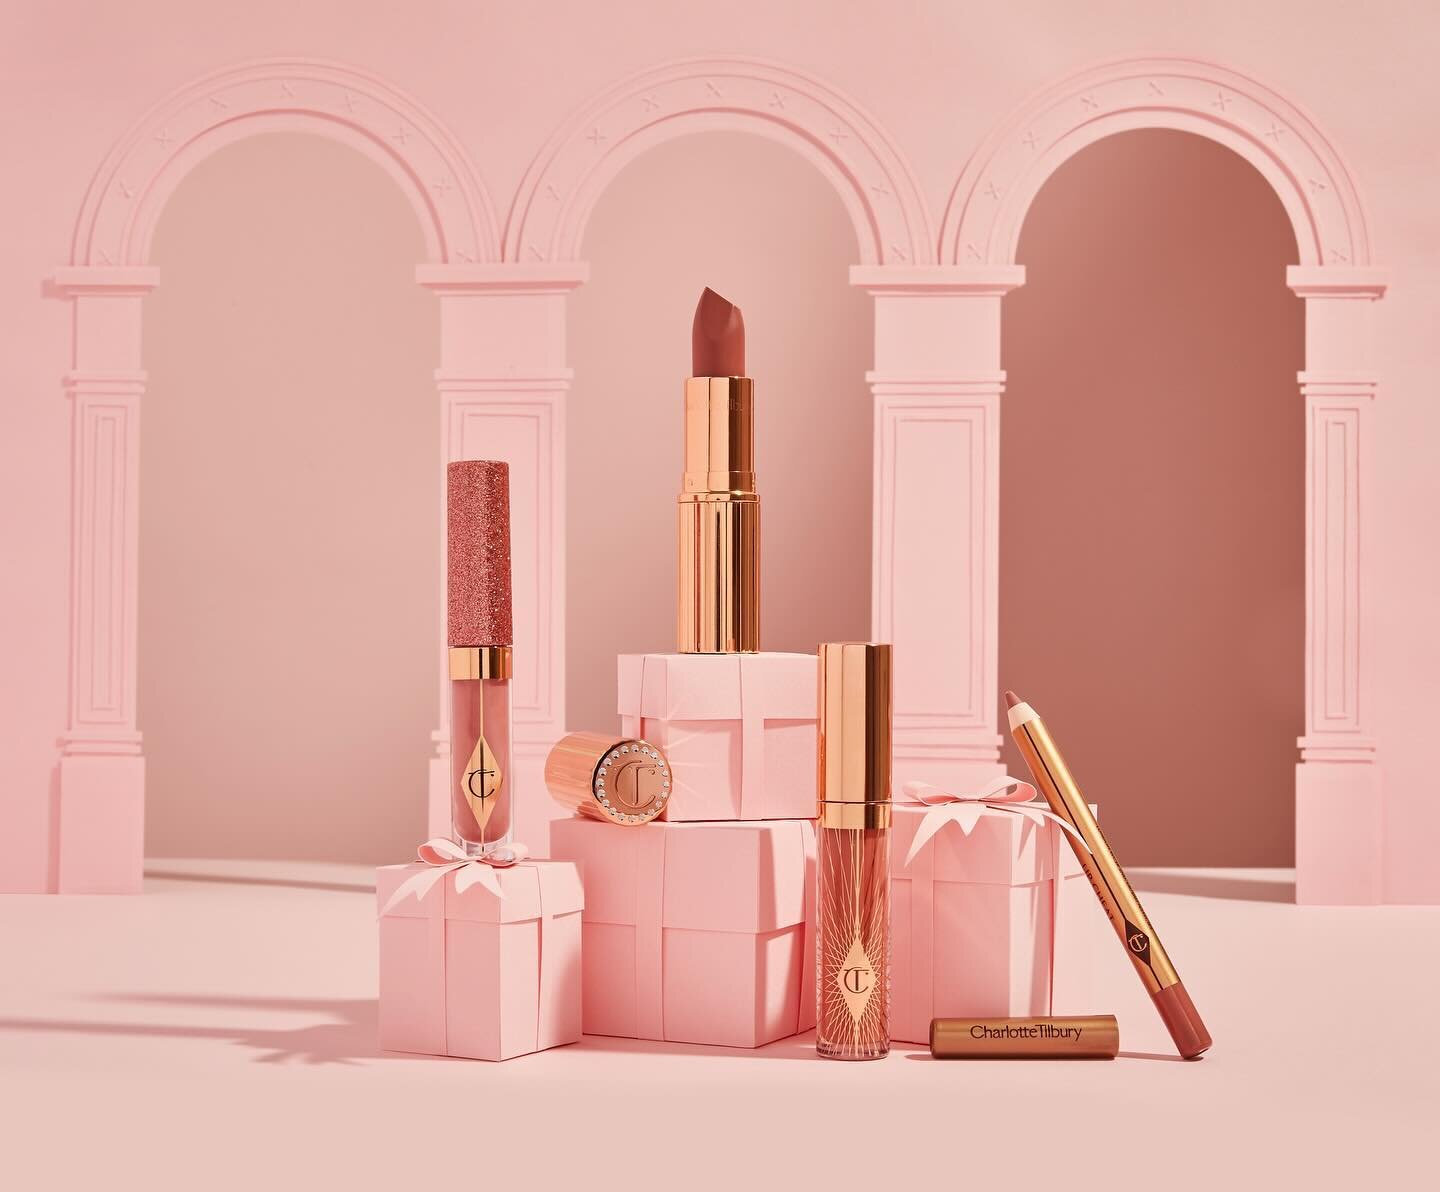 | BEAUTY

I had so much fun creating the perfect backdrop and props for the perfect lip kit 💕 

@charlottetilbury @gabriellajphoto 

#paperinstallation #paperartist #setdesign #installations #windowdisplay #papersculptures #retaildesign #eventdesign